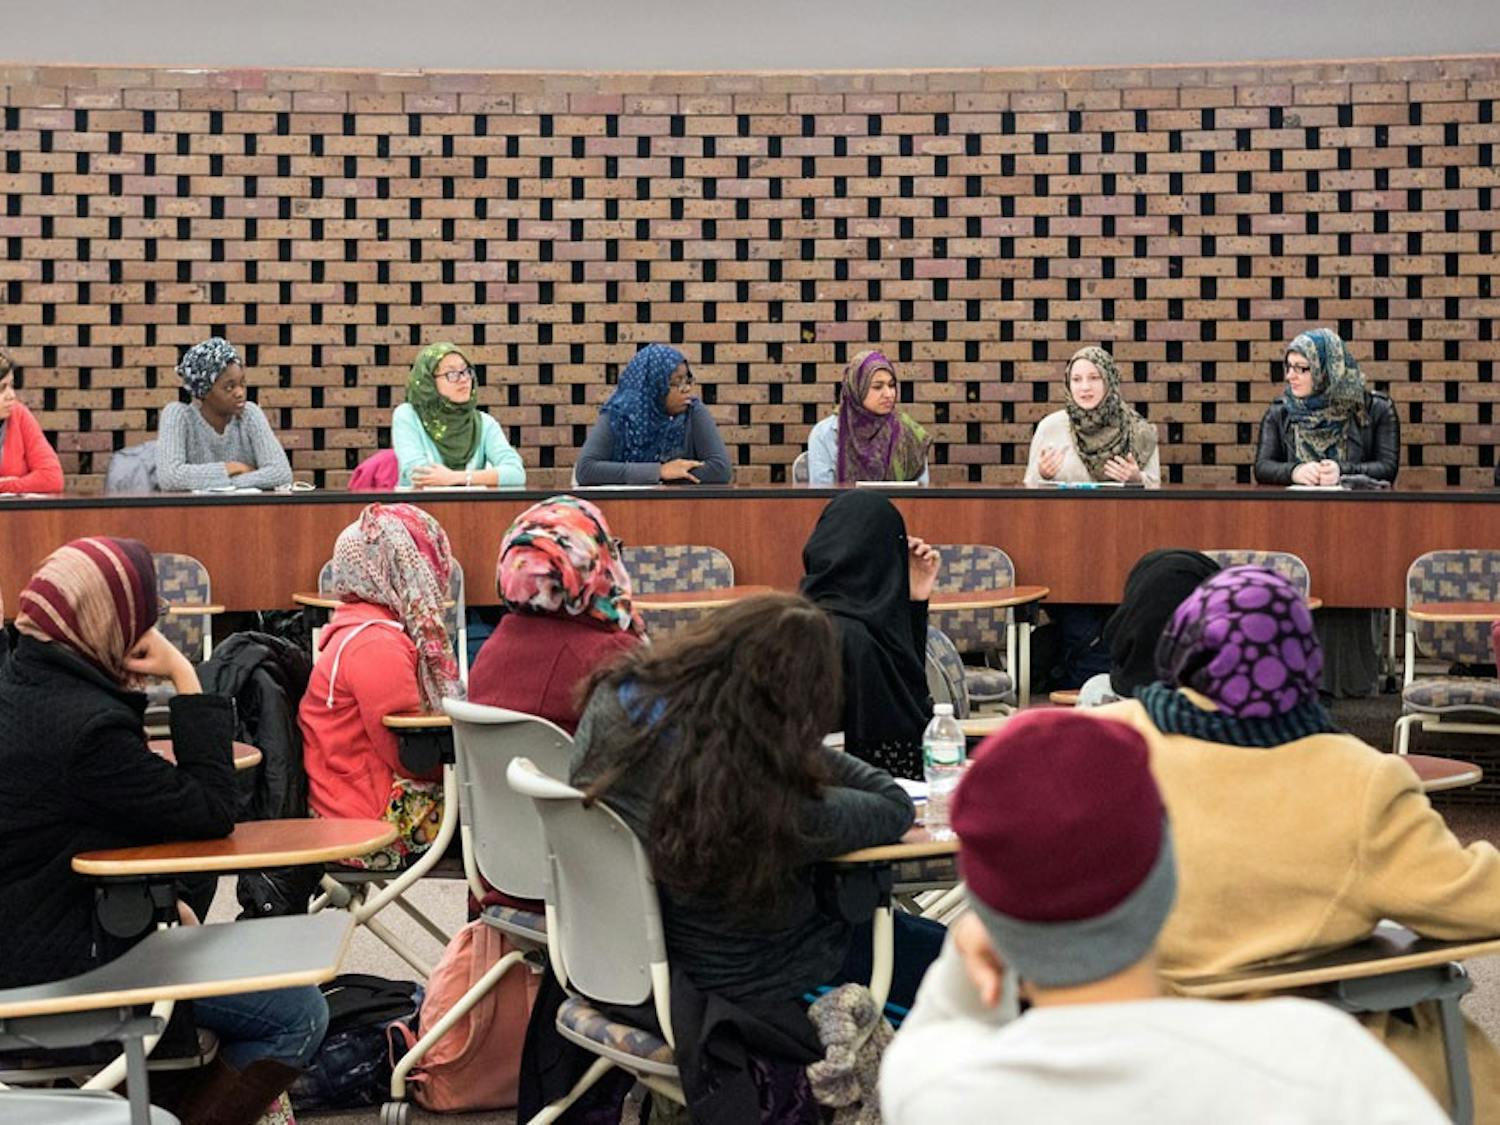 During a discussion session after the daylong “Cover a Mile in Her Scarf” event, Muslim and non-Muslim students talked about perceptions on wearing a hijab on Feb. 20. Non-Muslim students spent the day wearing a hijab, discovering what daily life is like for hijabis (Muslim women who choose to wear a hijab).